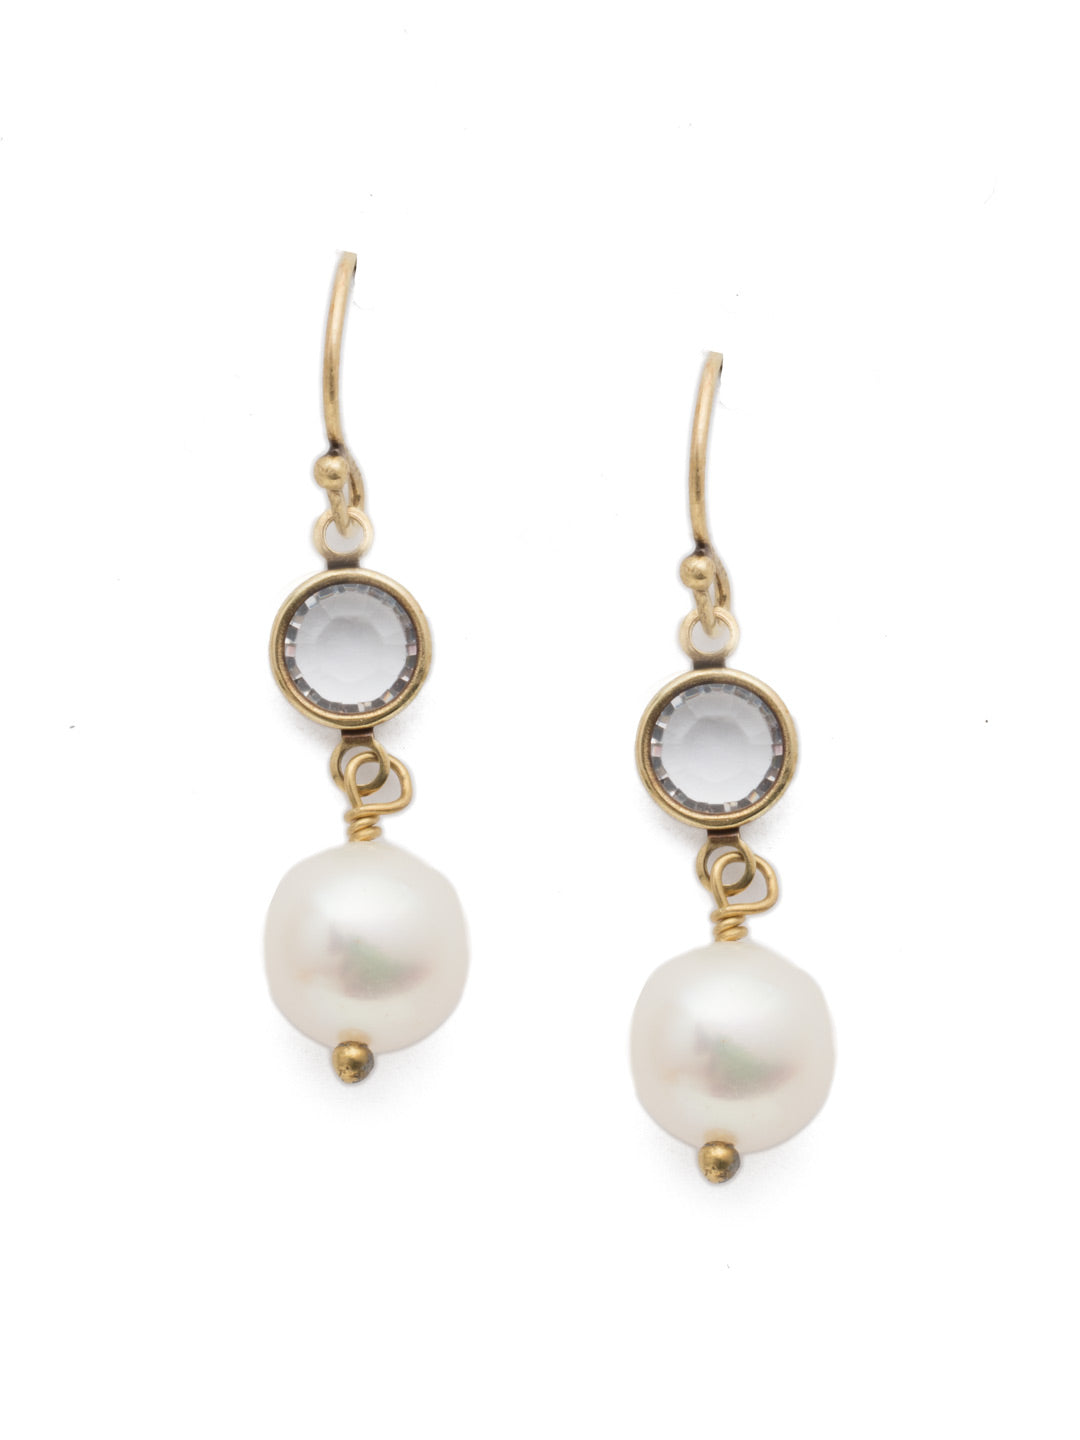 Geneva Dangle Earrings - 4EET4AGMDP - <p>Put on the Geneva Dangle Earrings for a classic drip of pearls and a couple of shiny clear gems to make them extra special. From Sorrelli's Modern Pearl collection in our Antique Gold-tone finish.</p>